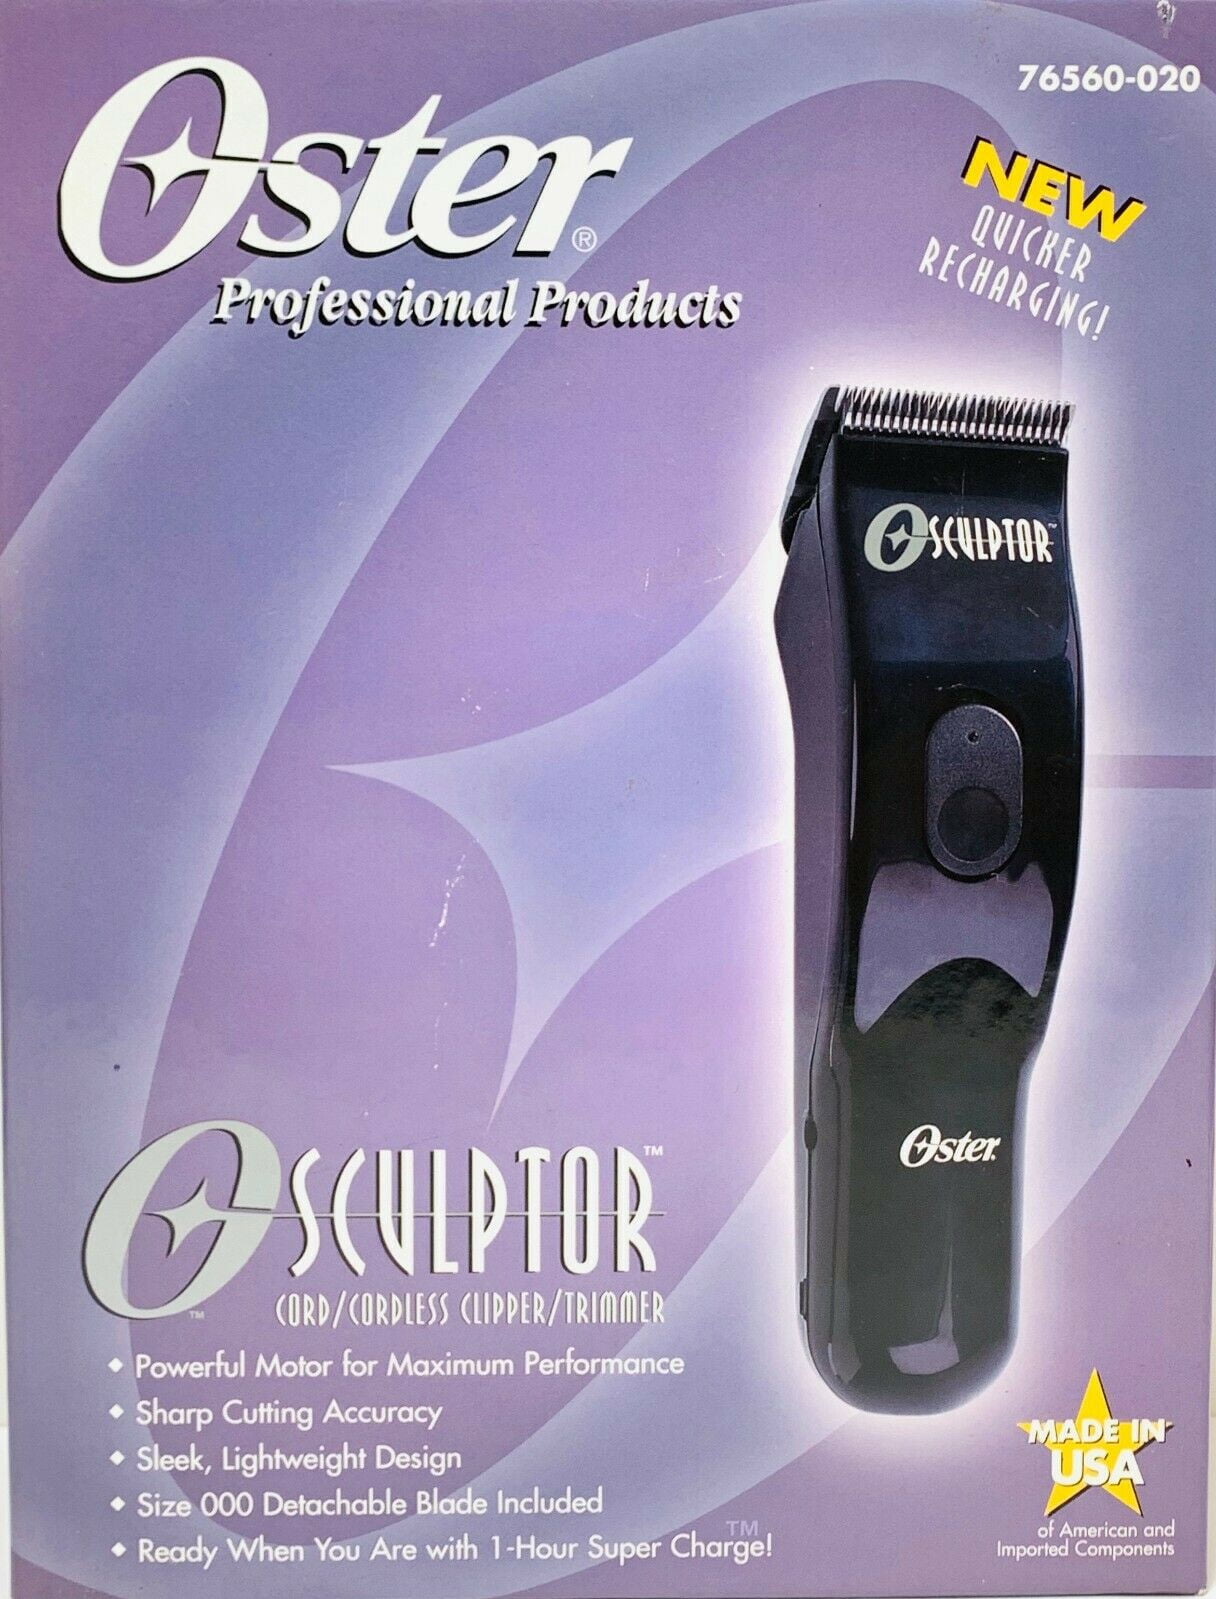 oster juice cordless clippers